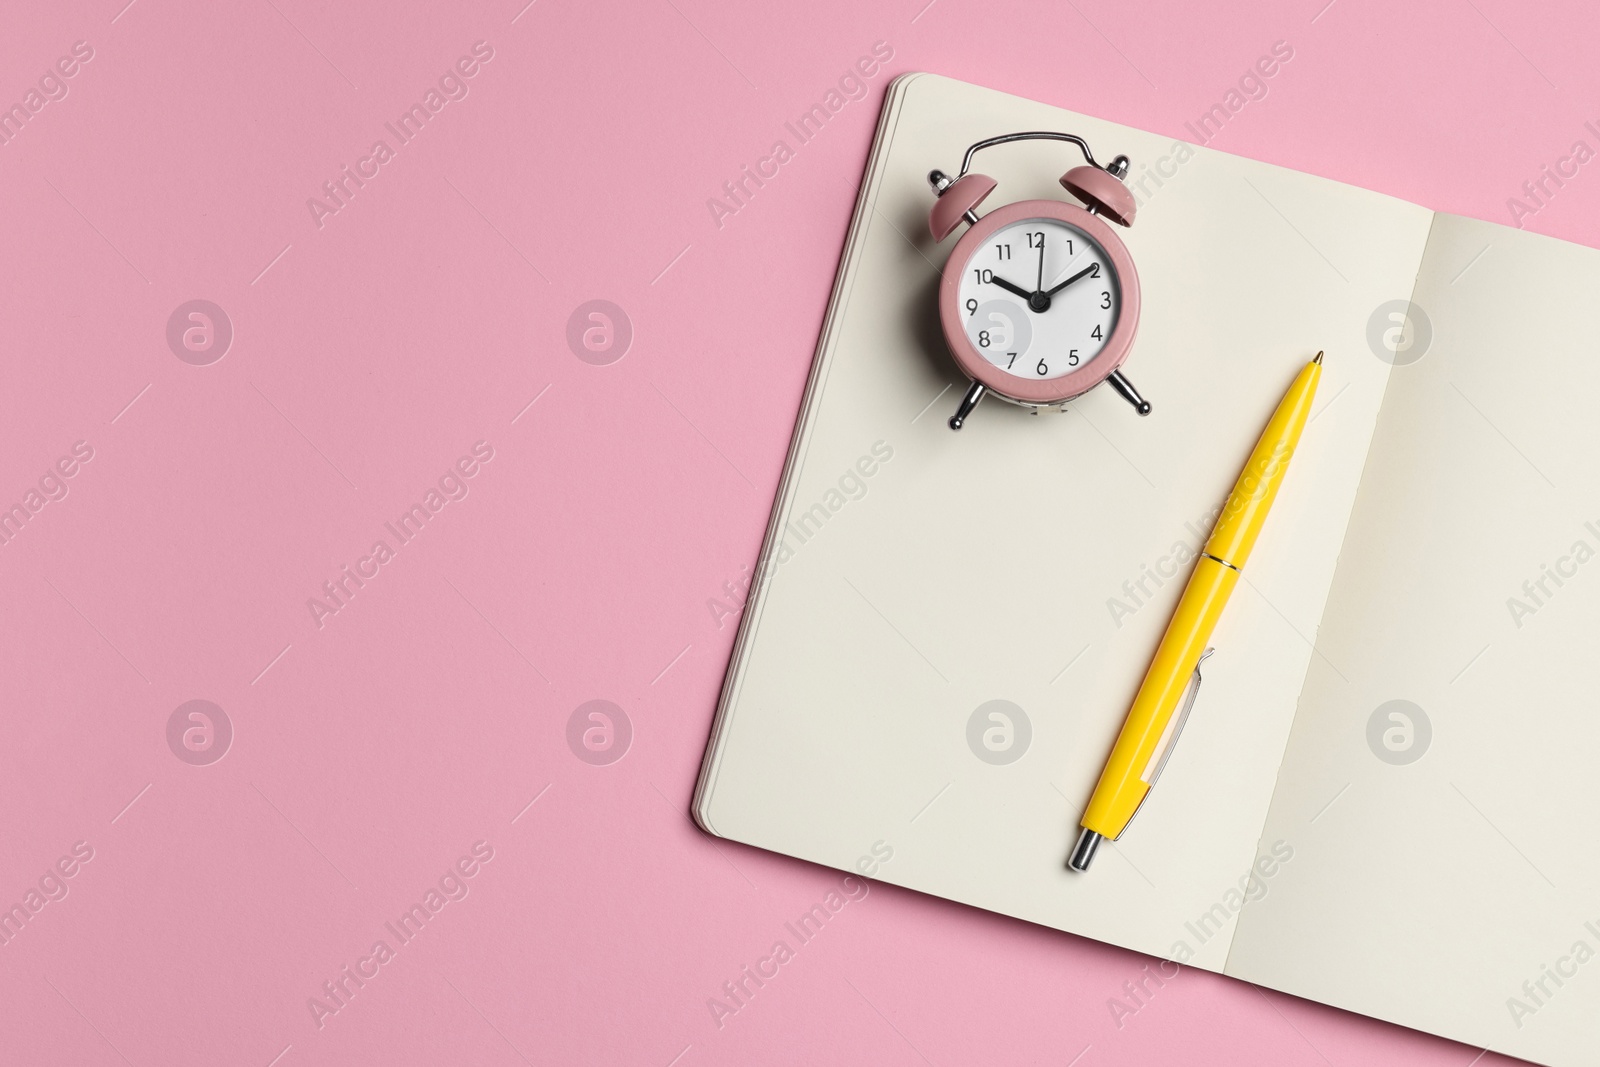 Photo of Ballpoint pen, notebook and alarm clock on pink background, top view. Space for text